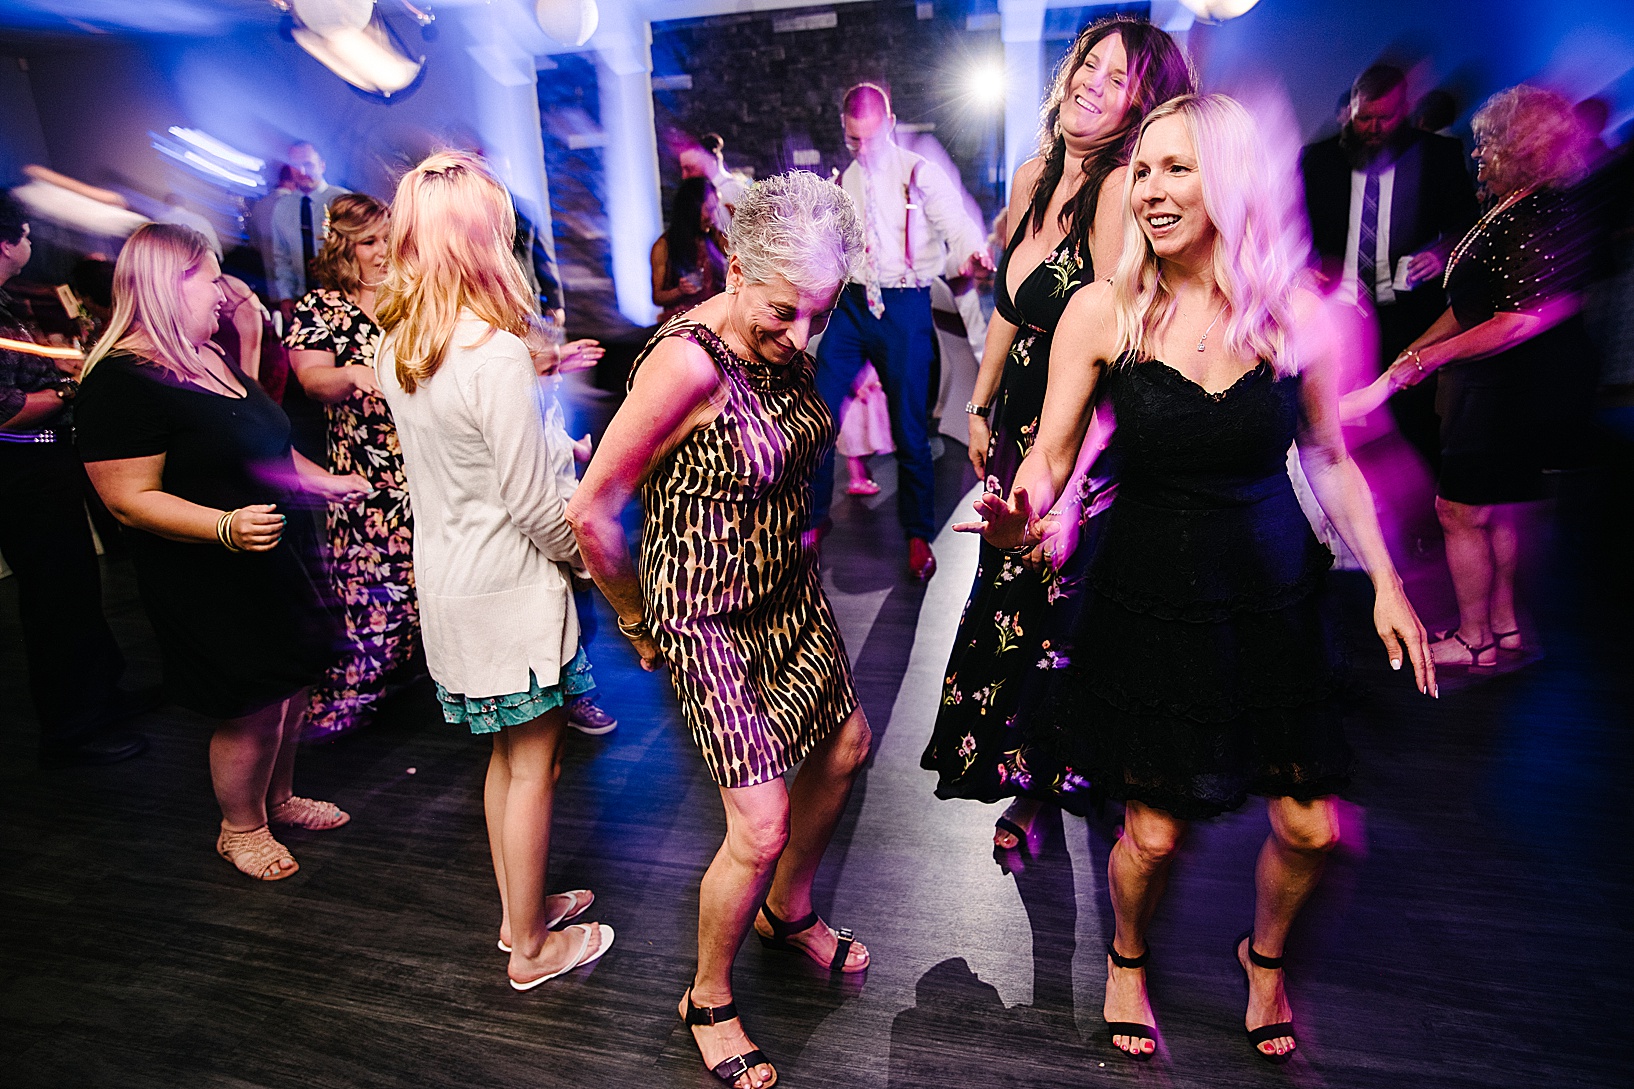 Women standing around laughing on the dance floor and getting ready to dance at post wedding celebration